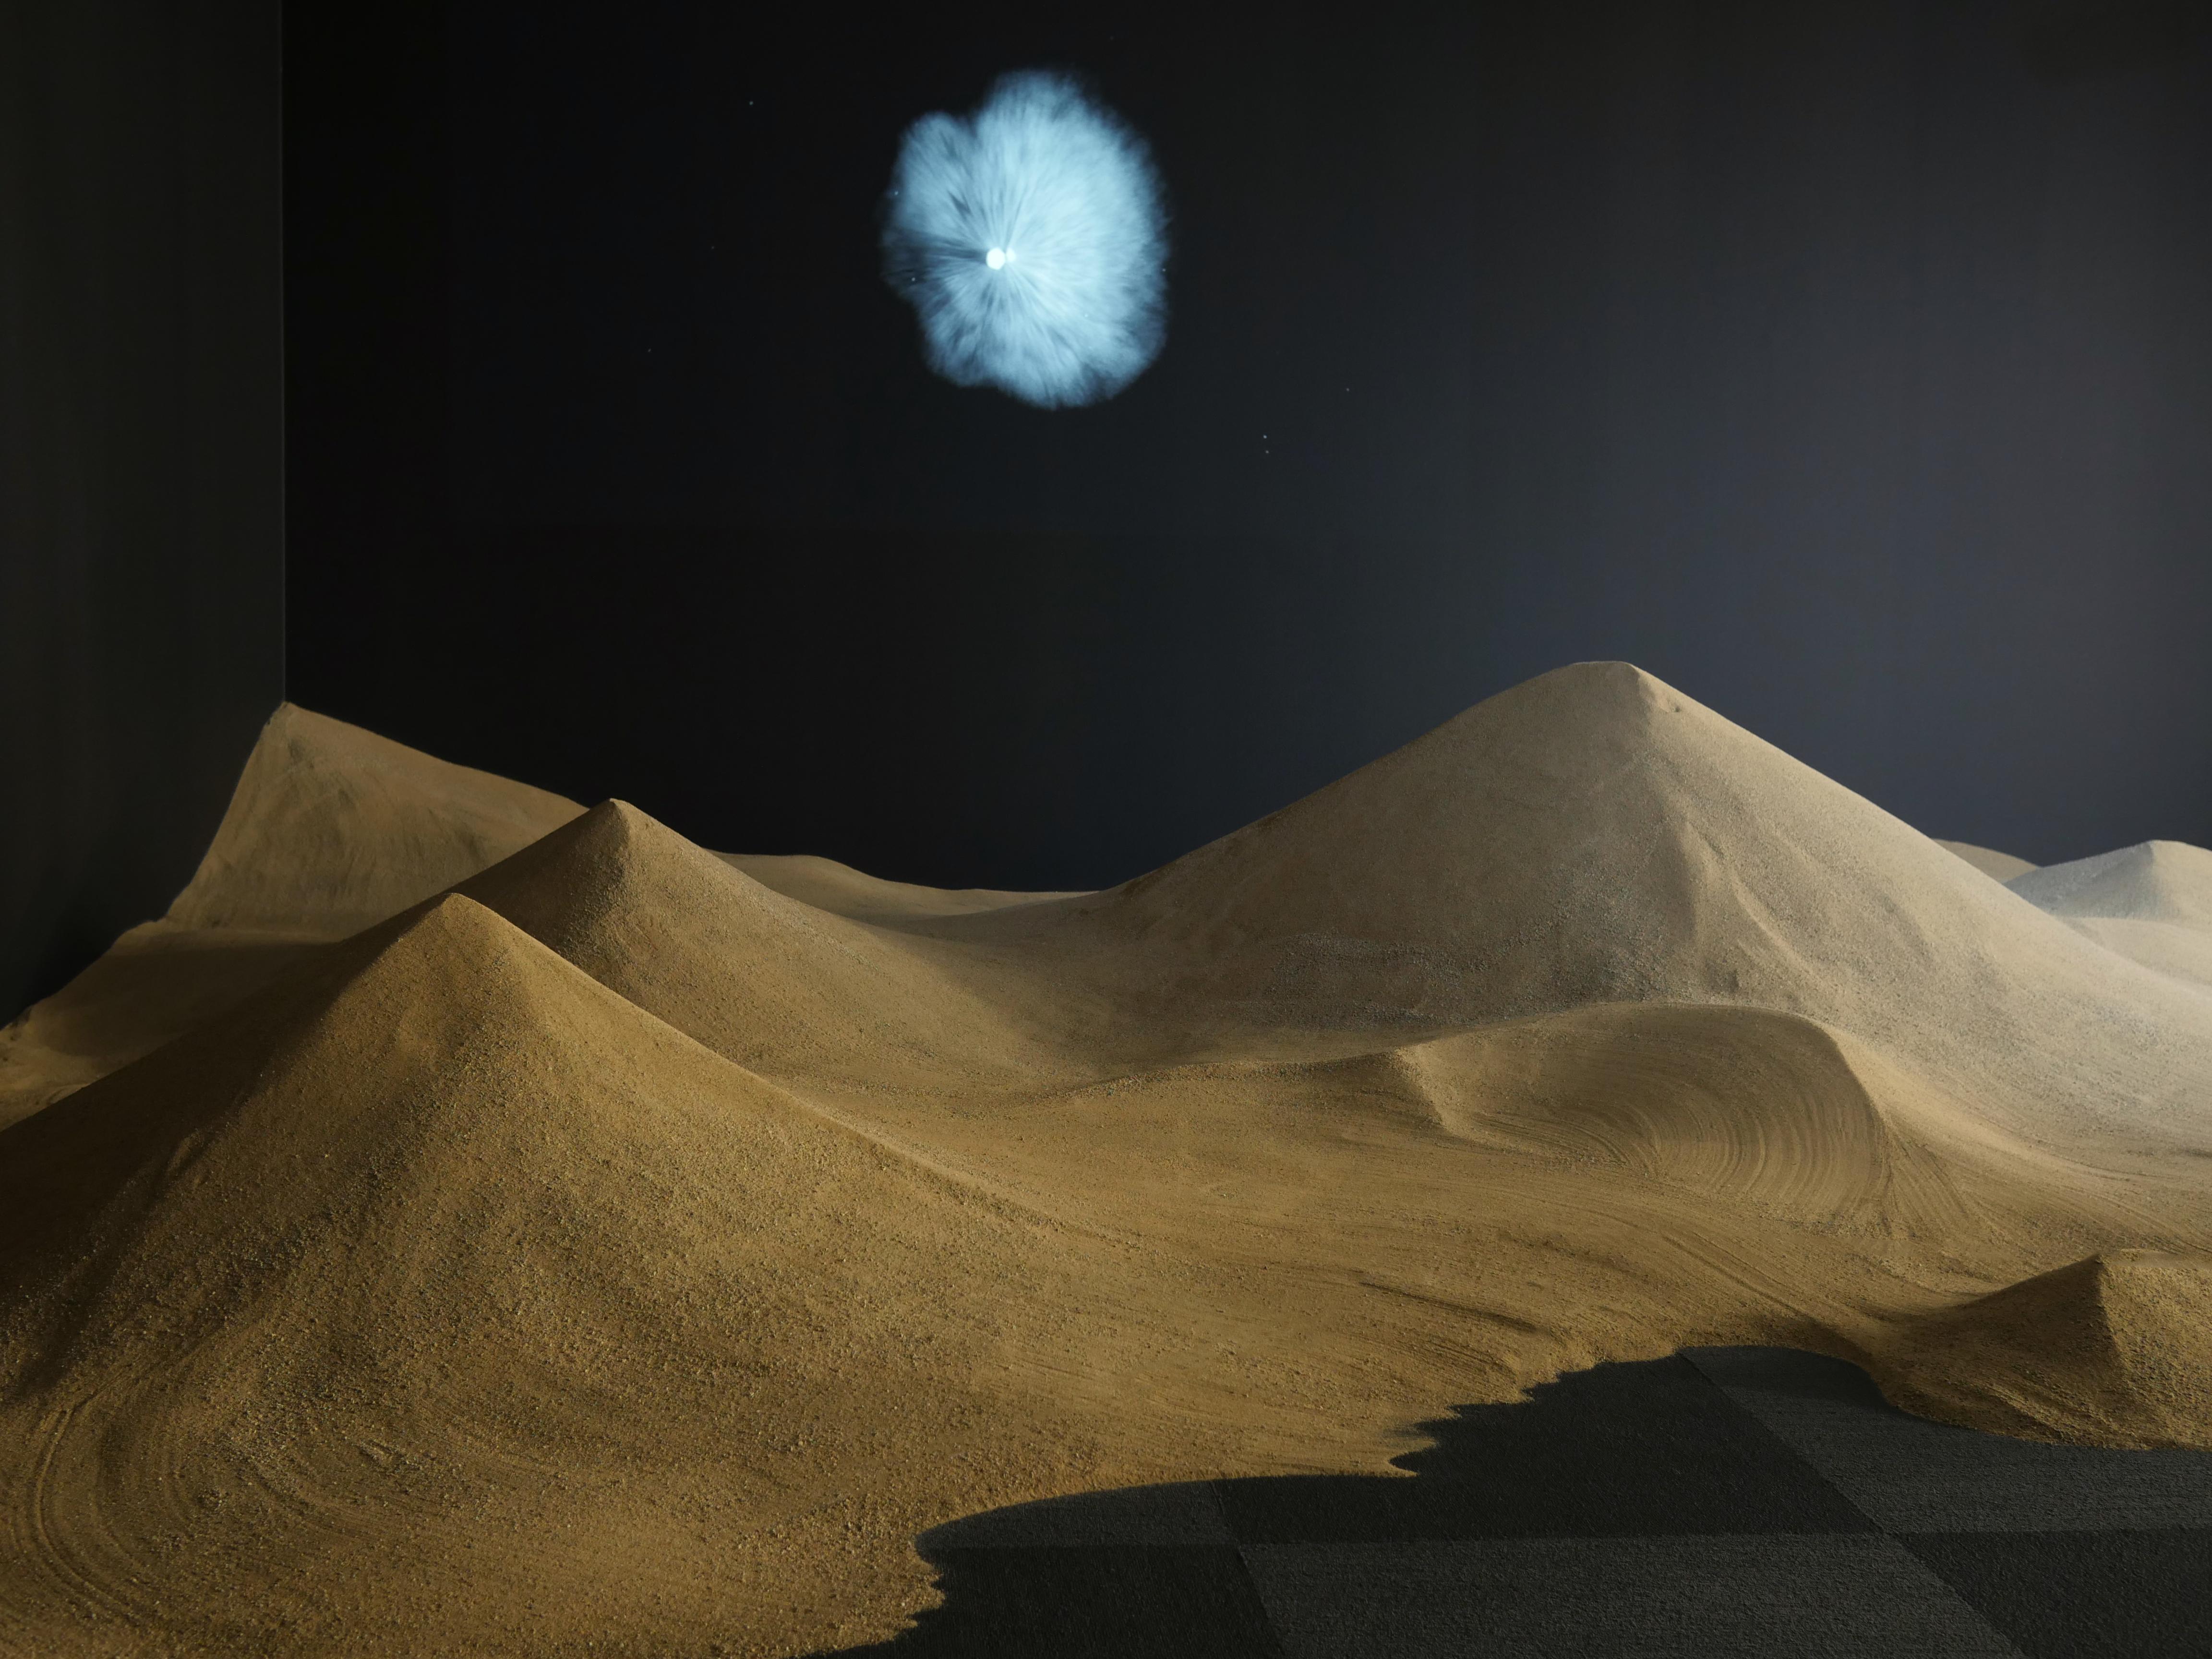 Dimly lit sand dunes stand out against a dark black background. An irregularly shaped light formation is projected on the wall above the dunes like a moon rising in the night sky.